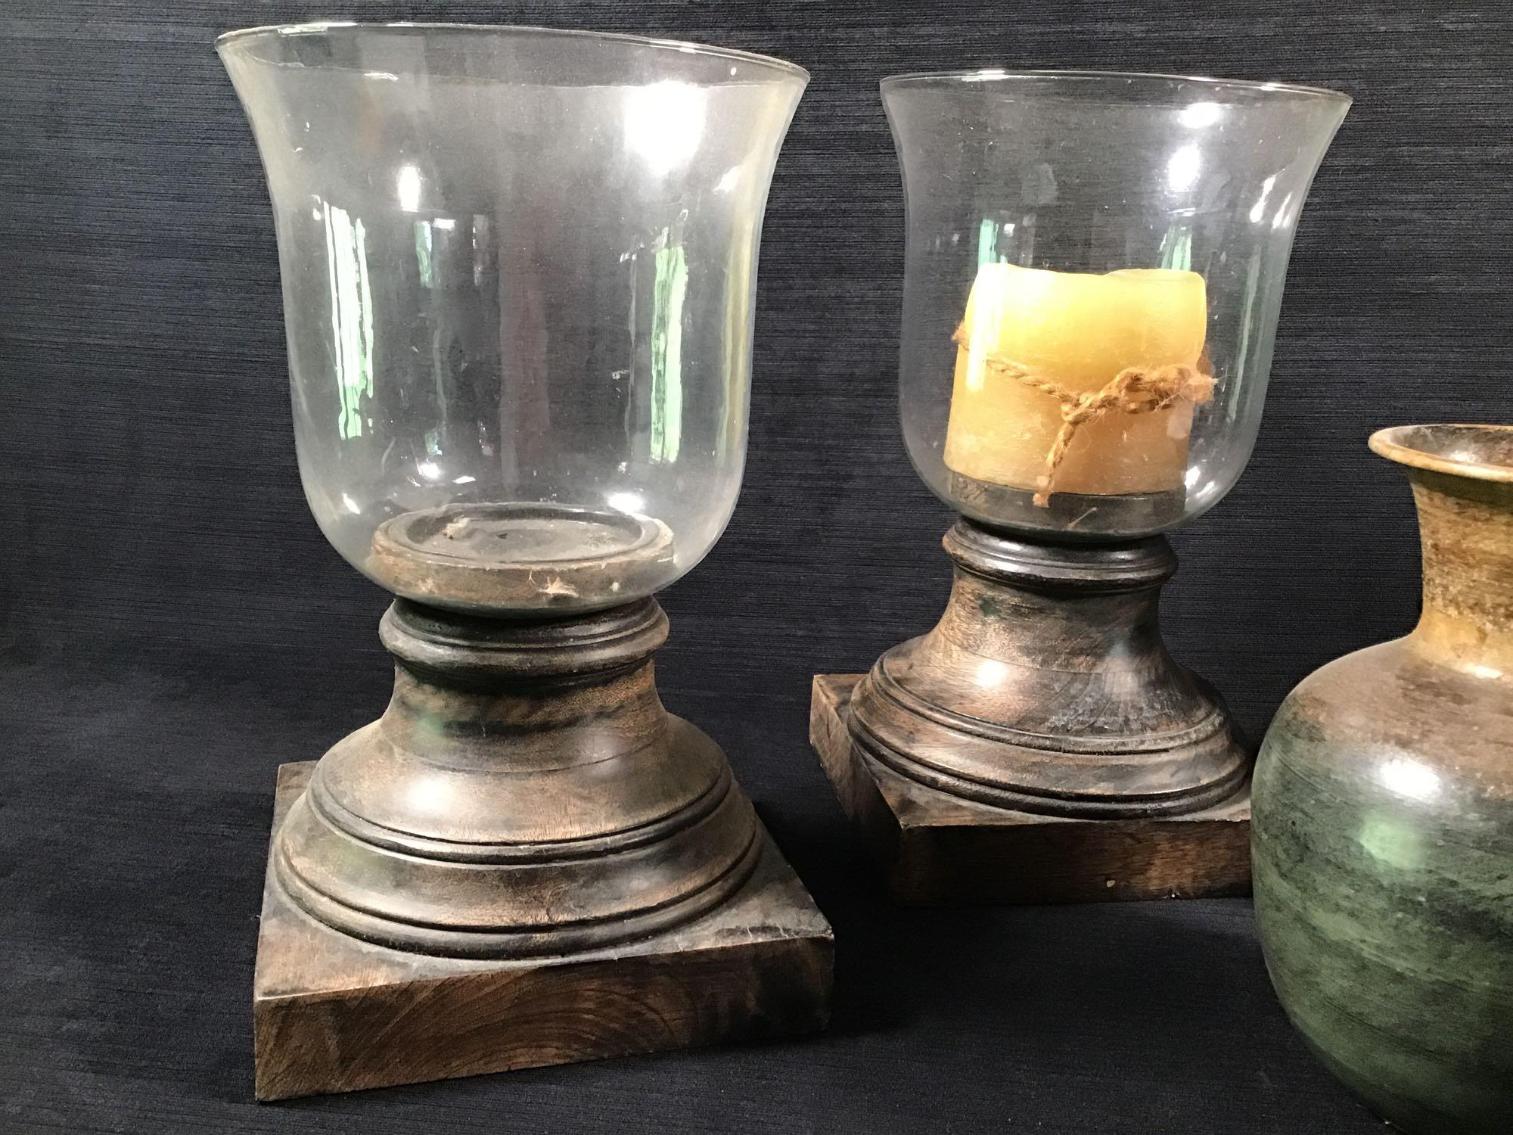 Image for Candleholders and Decorative Pottery